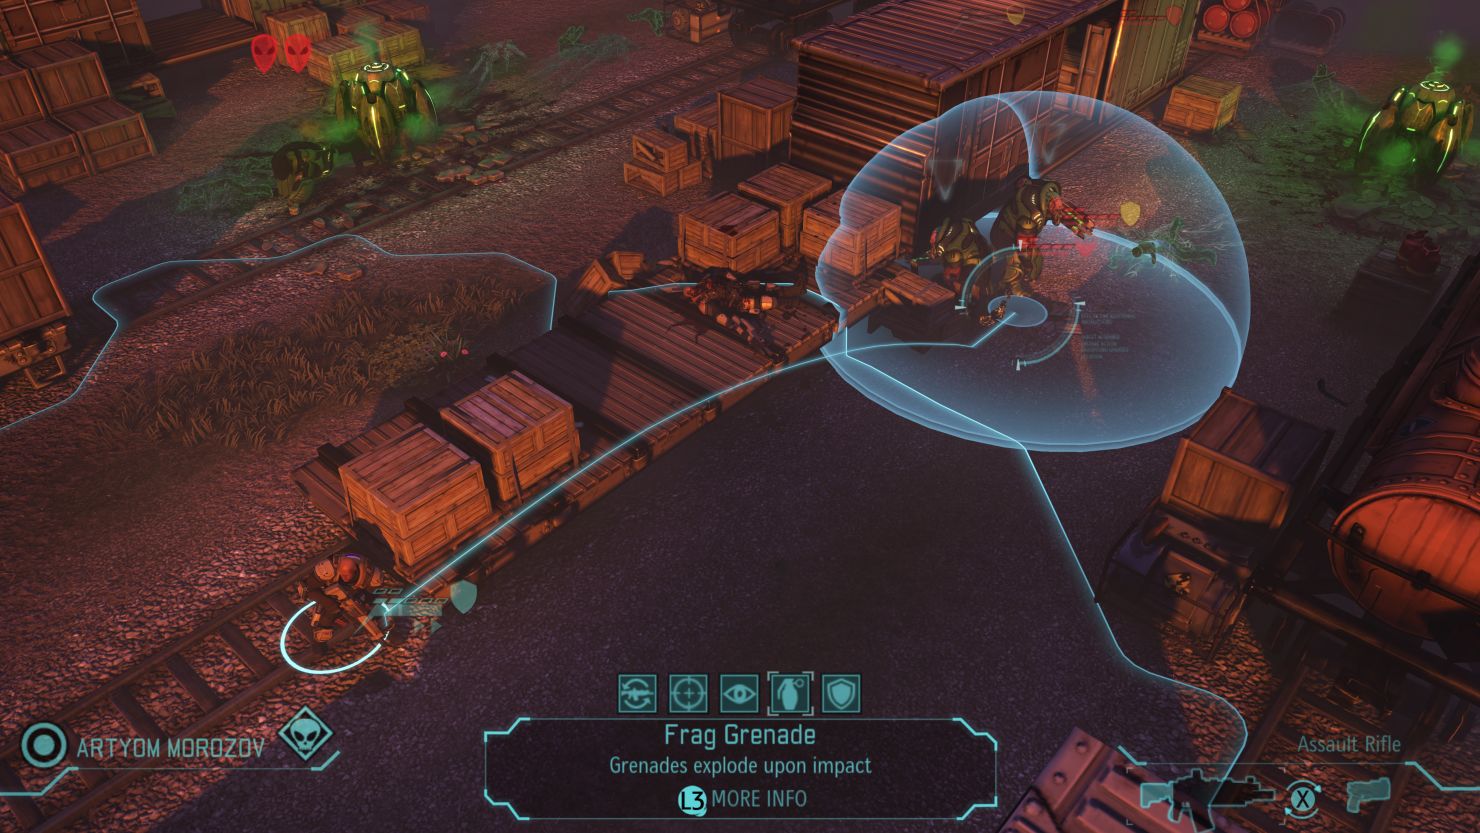 Firaxis Games's "XCOM: Enemy Unknown," a new turn-based strategy game, is slated to debut in October.